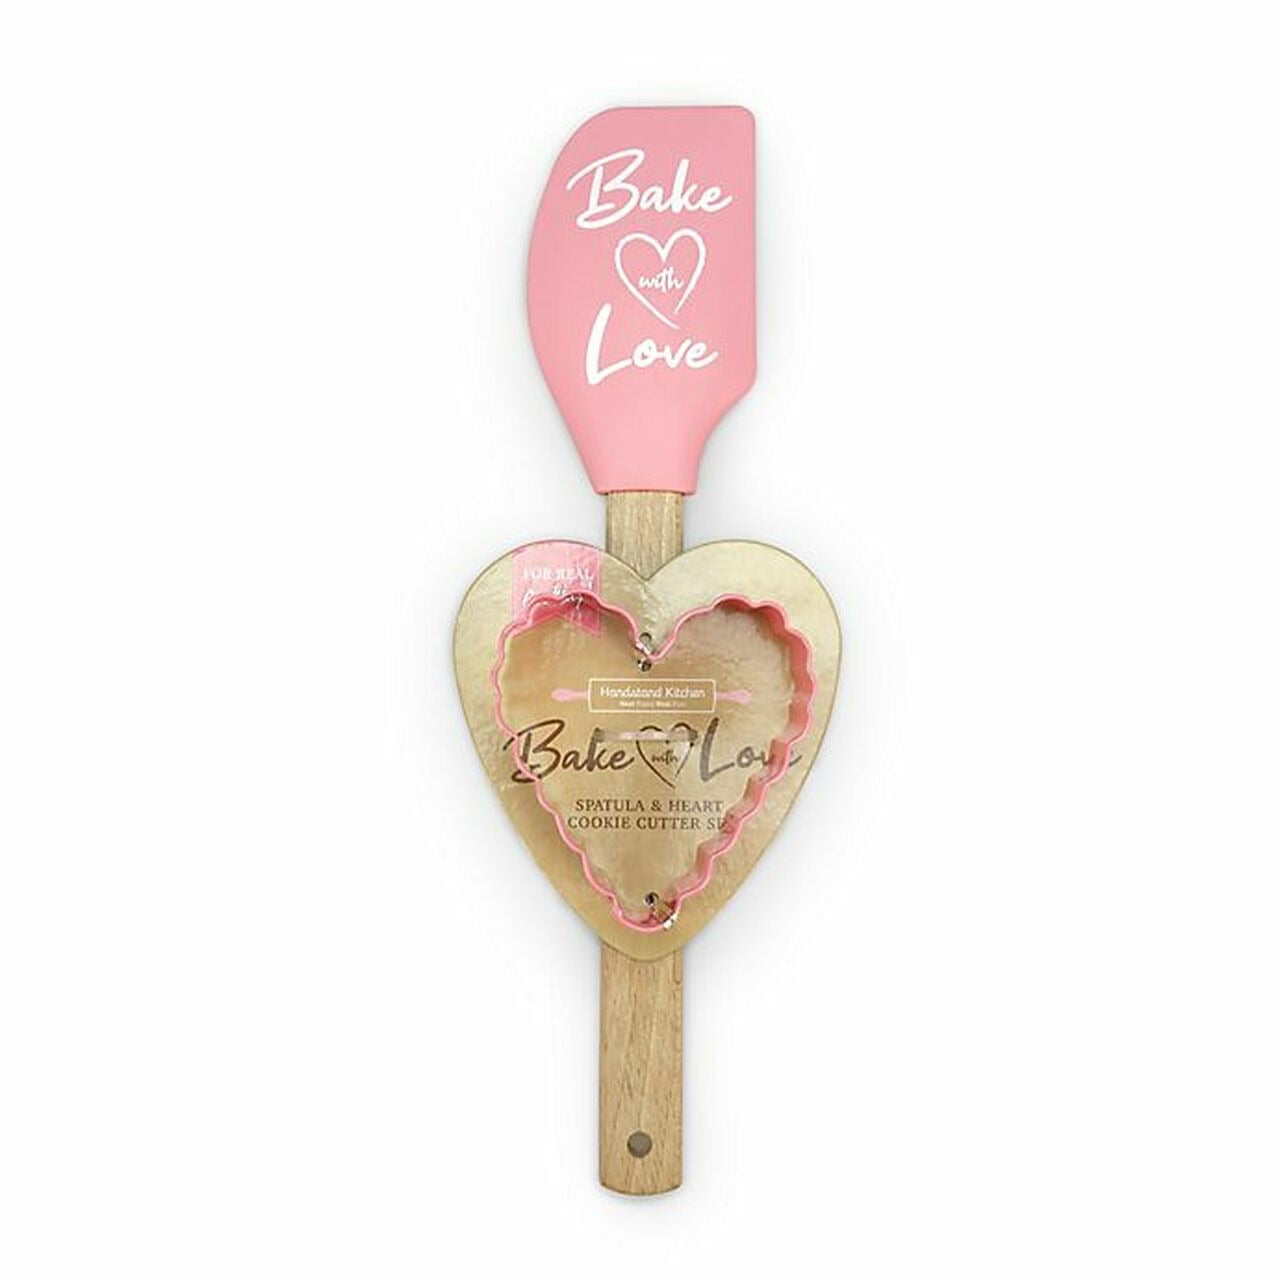 bake with love spatula and heart cookie cutter set